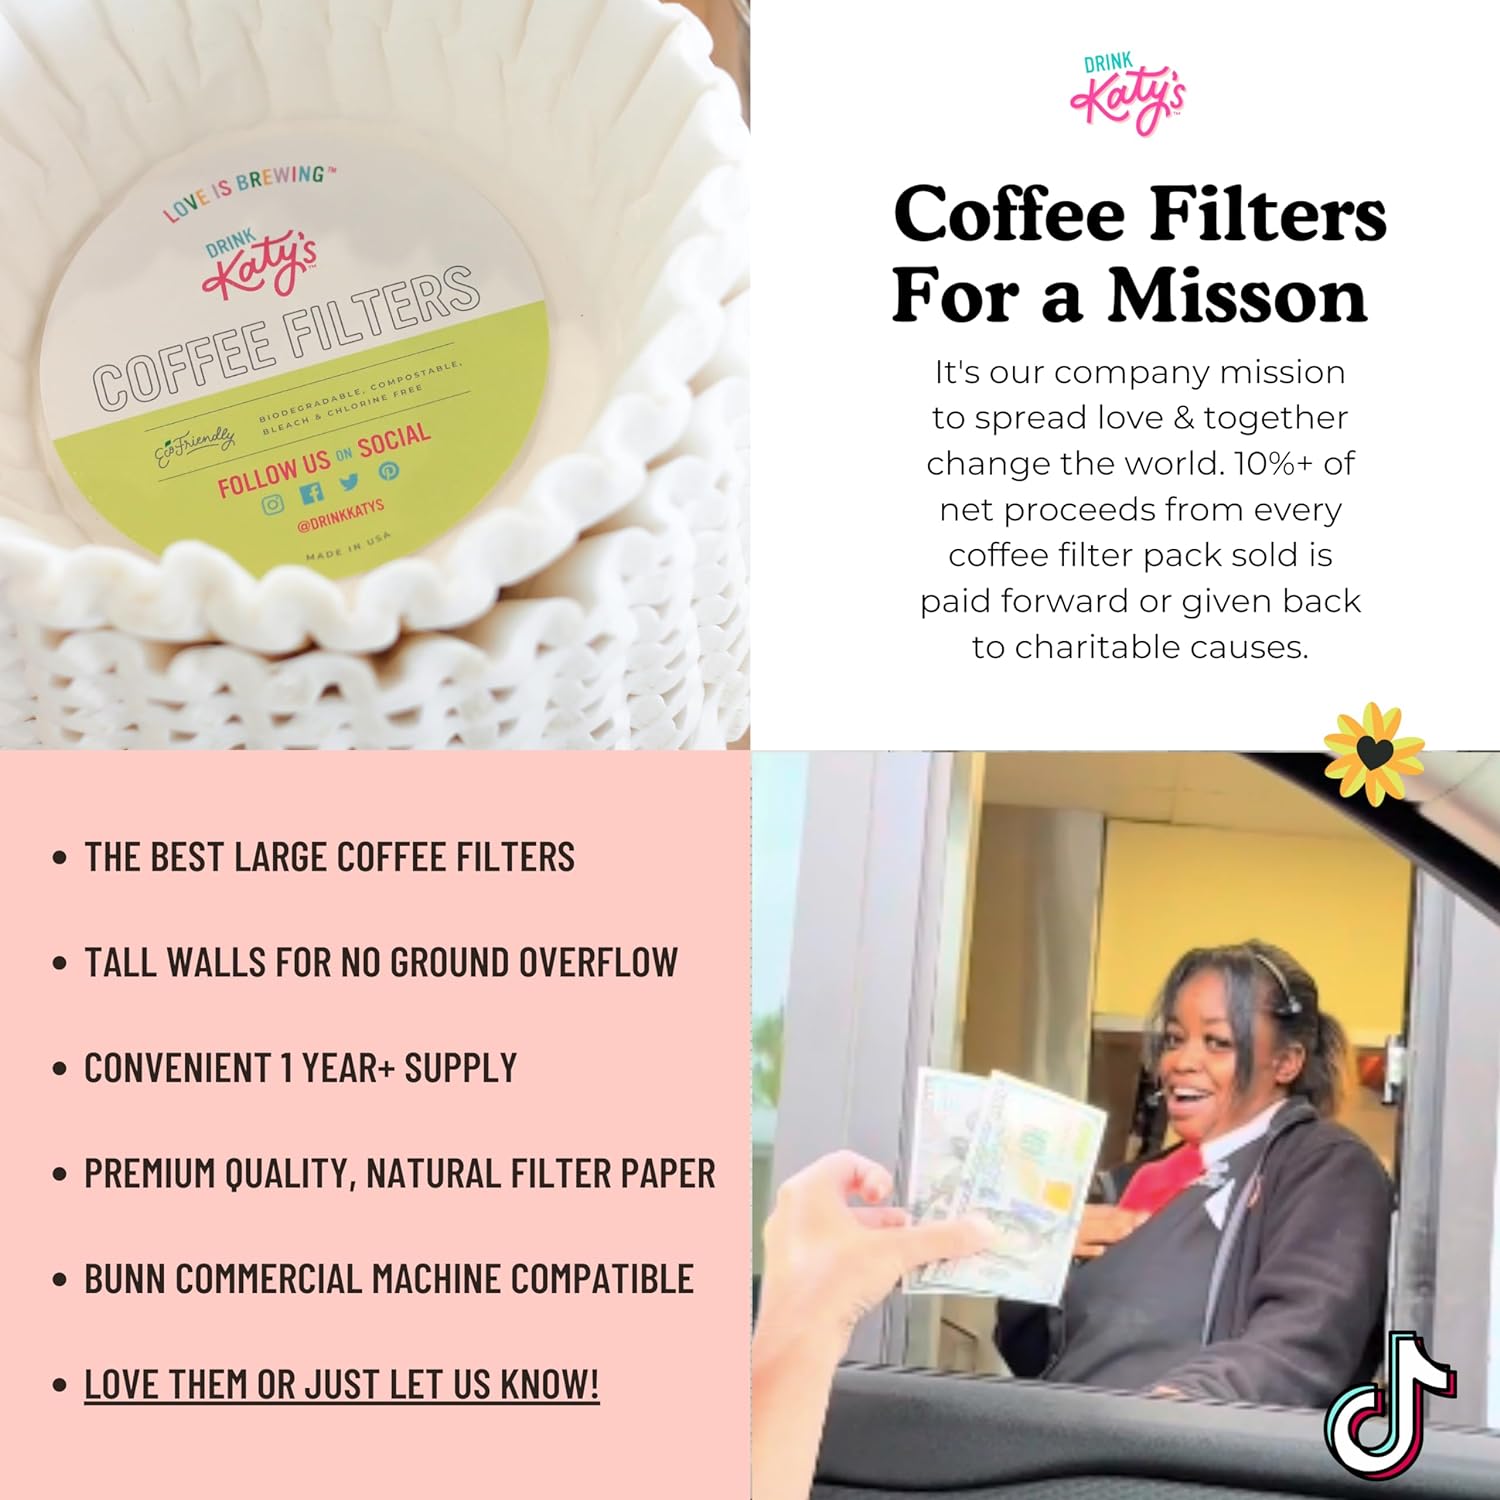 Drink Katy’s Large Coffee Filters - Bunn 12 Cup Commercial Coffee Filters - Premium Paper, All-Natural, Bigger  Tall Walls, No More Messy Ground Overflow - Woman Owned (500 Count / 1 Year+ Supply)